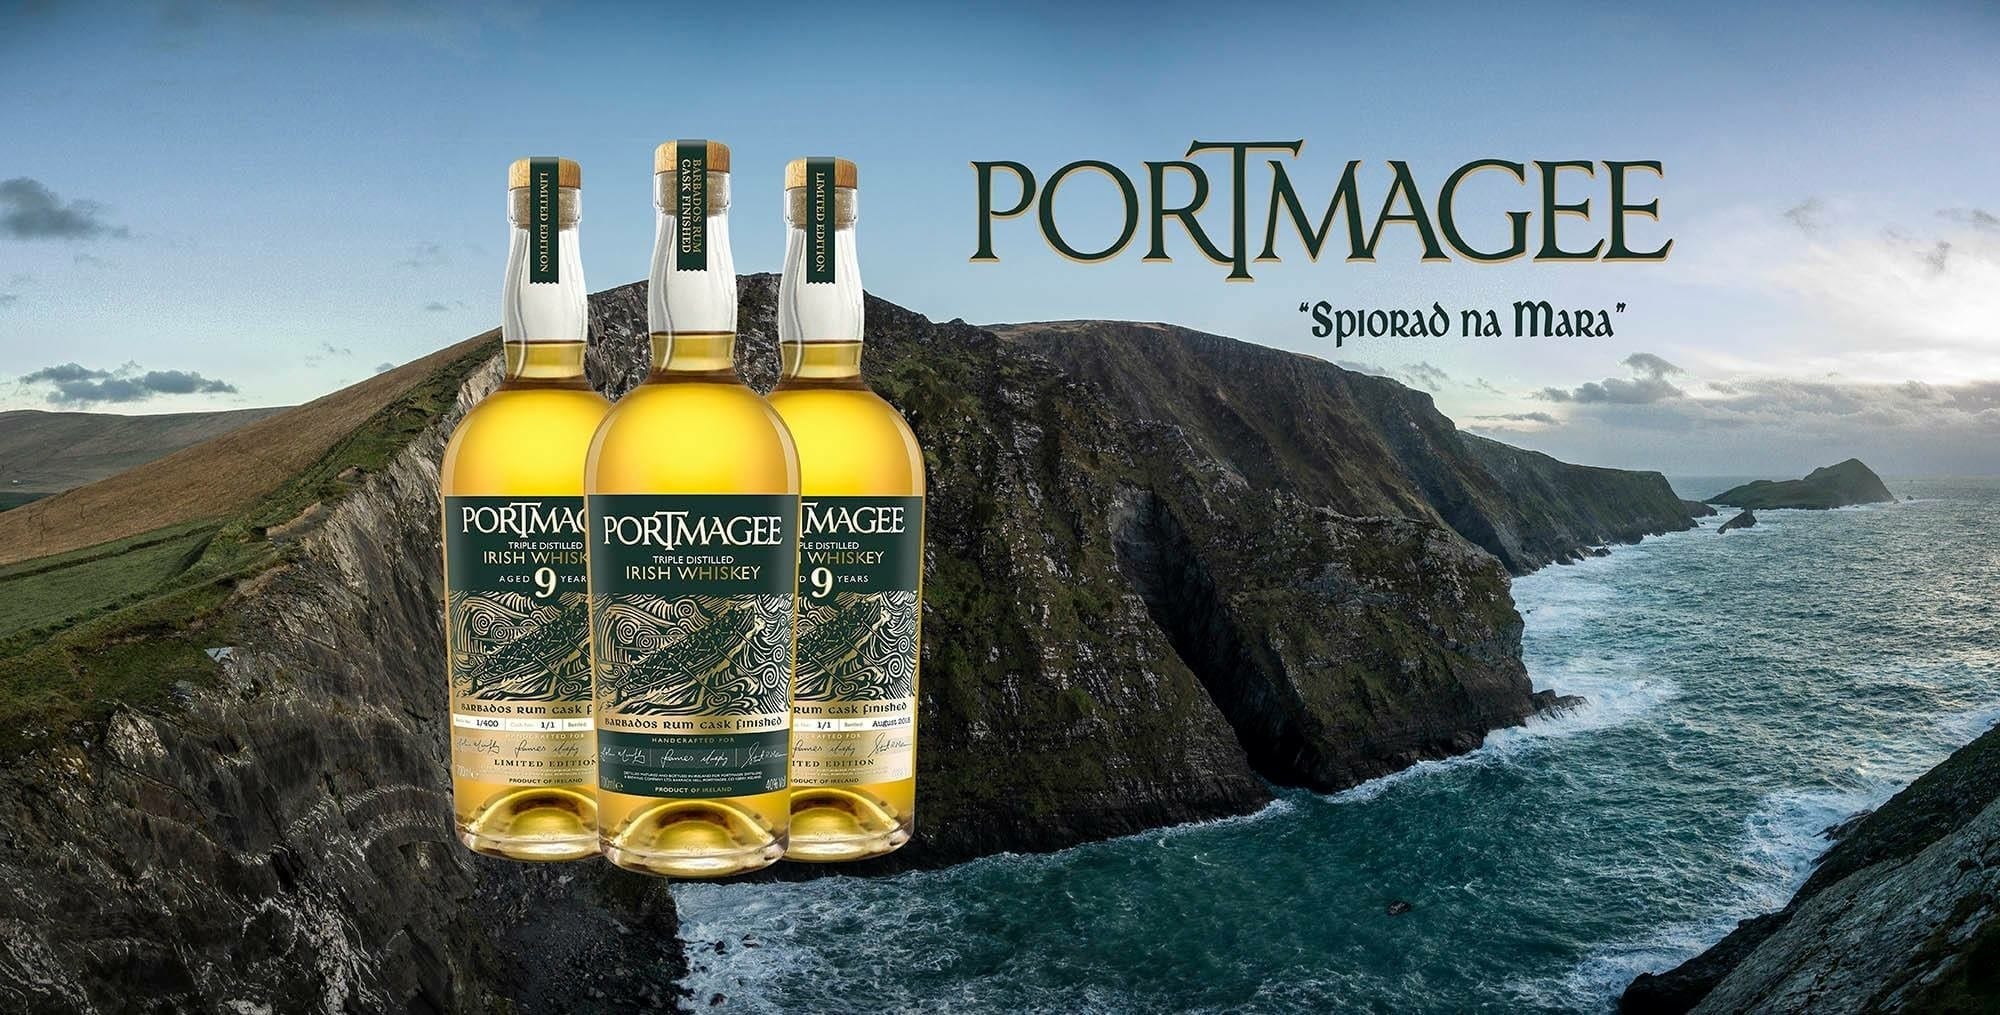 Portmagee Whiskey Make the Only 9 Year Old Irish Whiskey Currently on the Market Portmagee 9 is Single Cask Finished in Barbados Rum Casks International Whiskey Reviews by Irish Whiskey Blogger Stuart Mcnamara